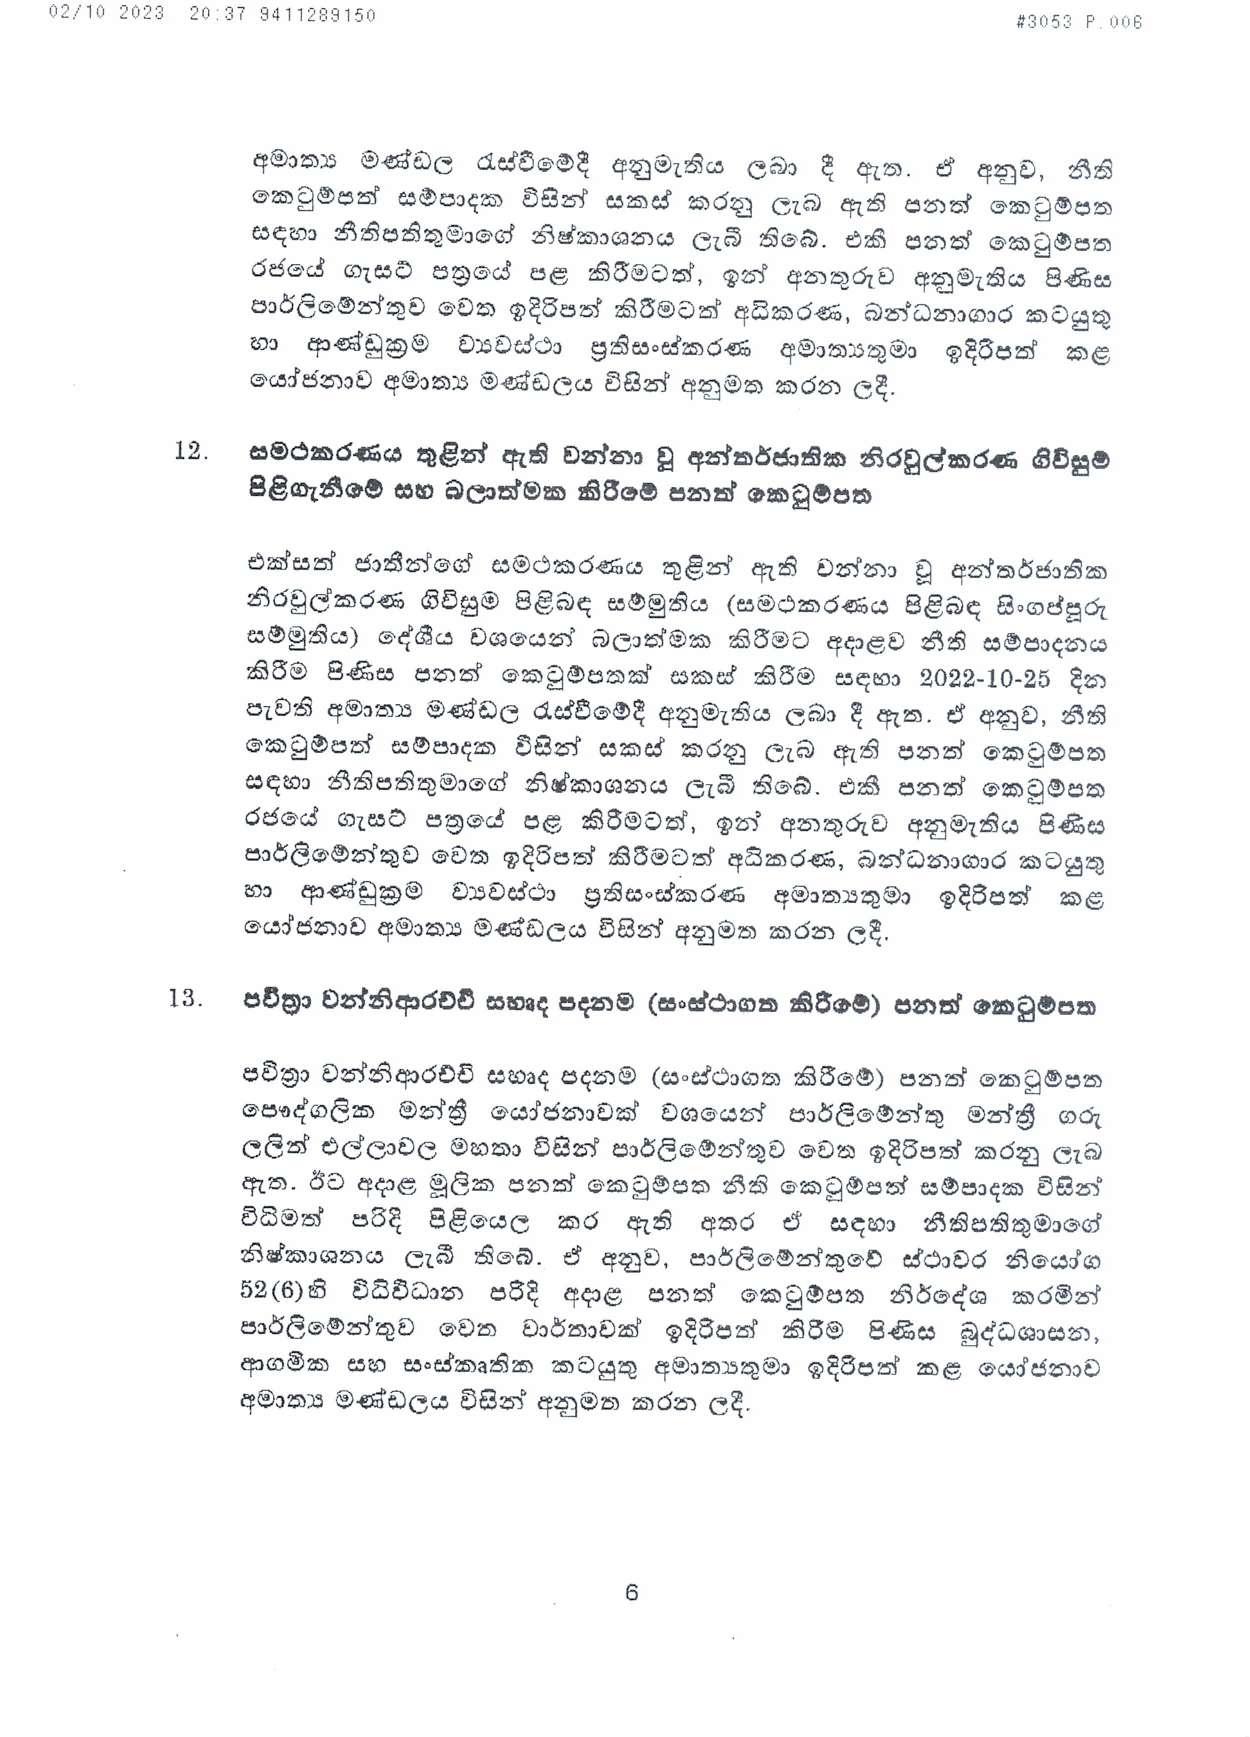 Cabinet Decision on 02.10.2023 page 006